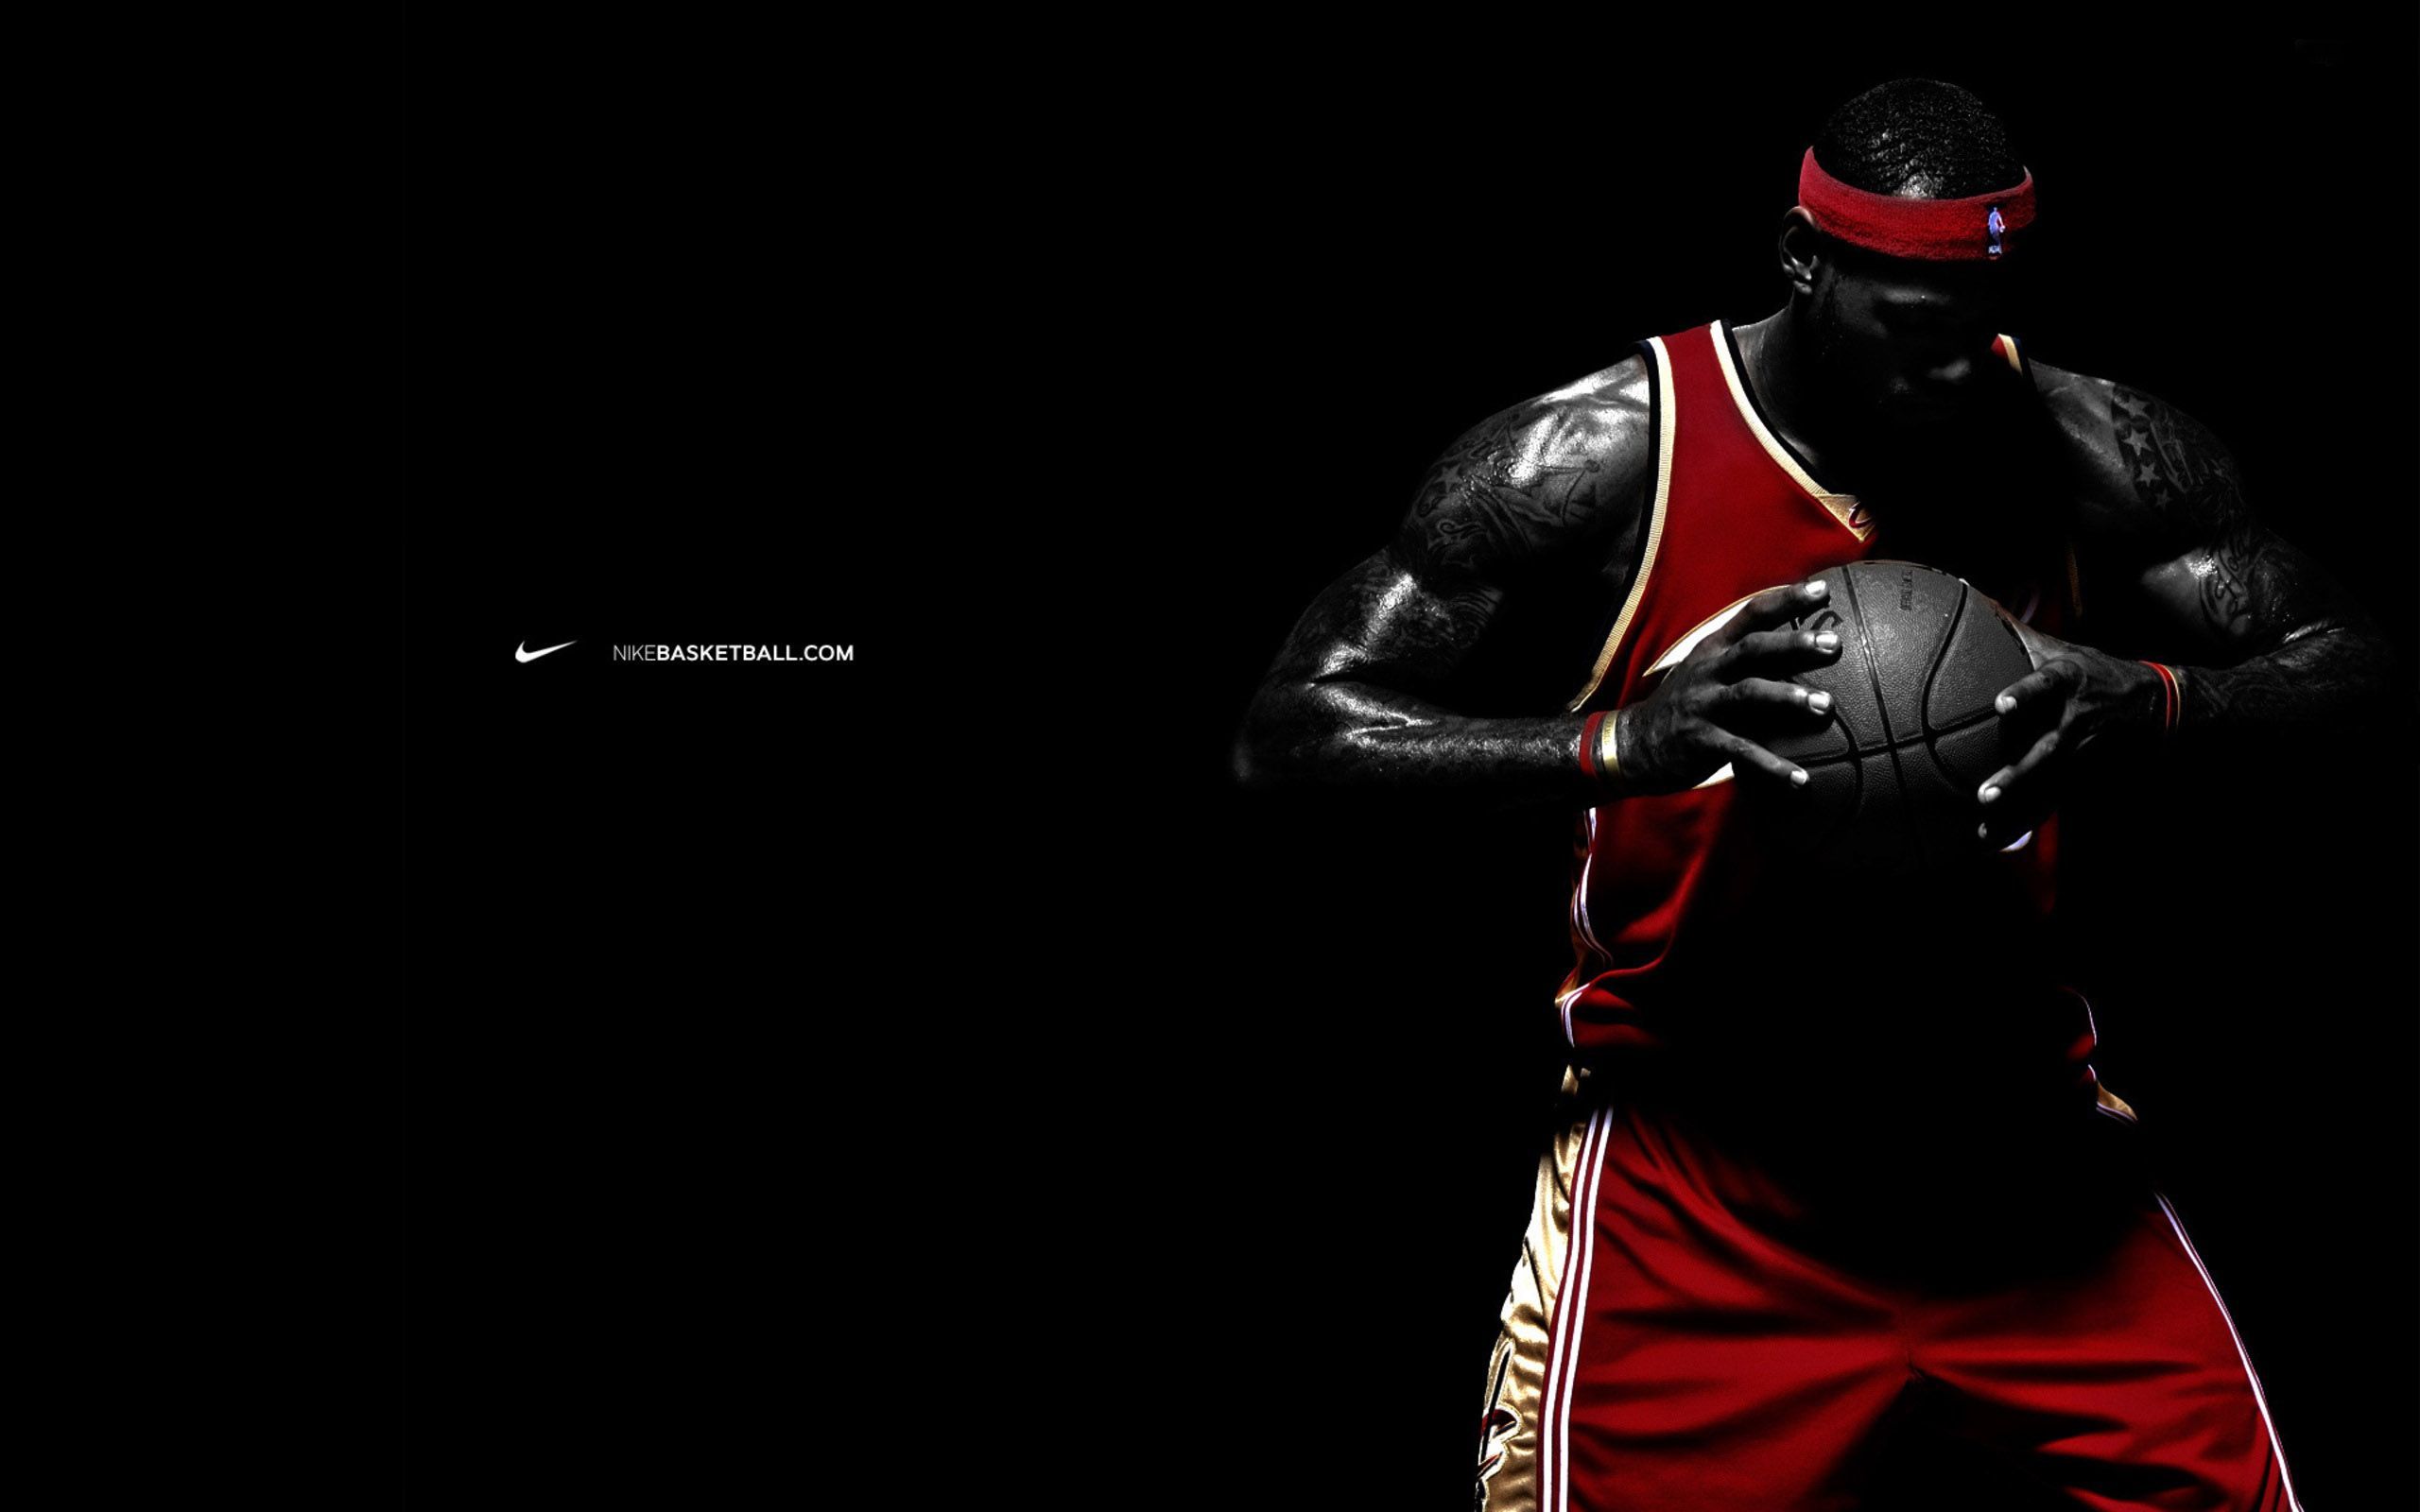 Nike Wallpaper HD Background Image FHD